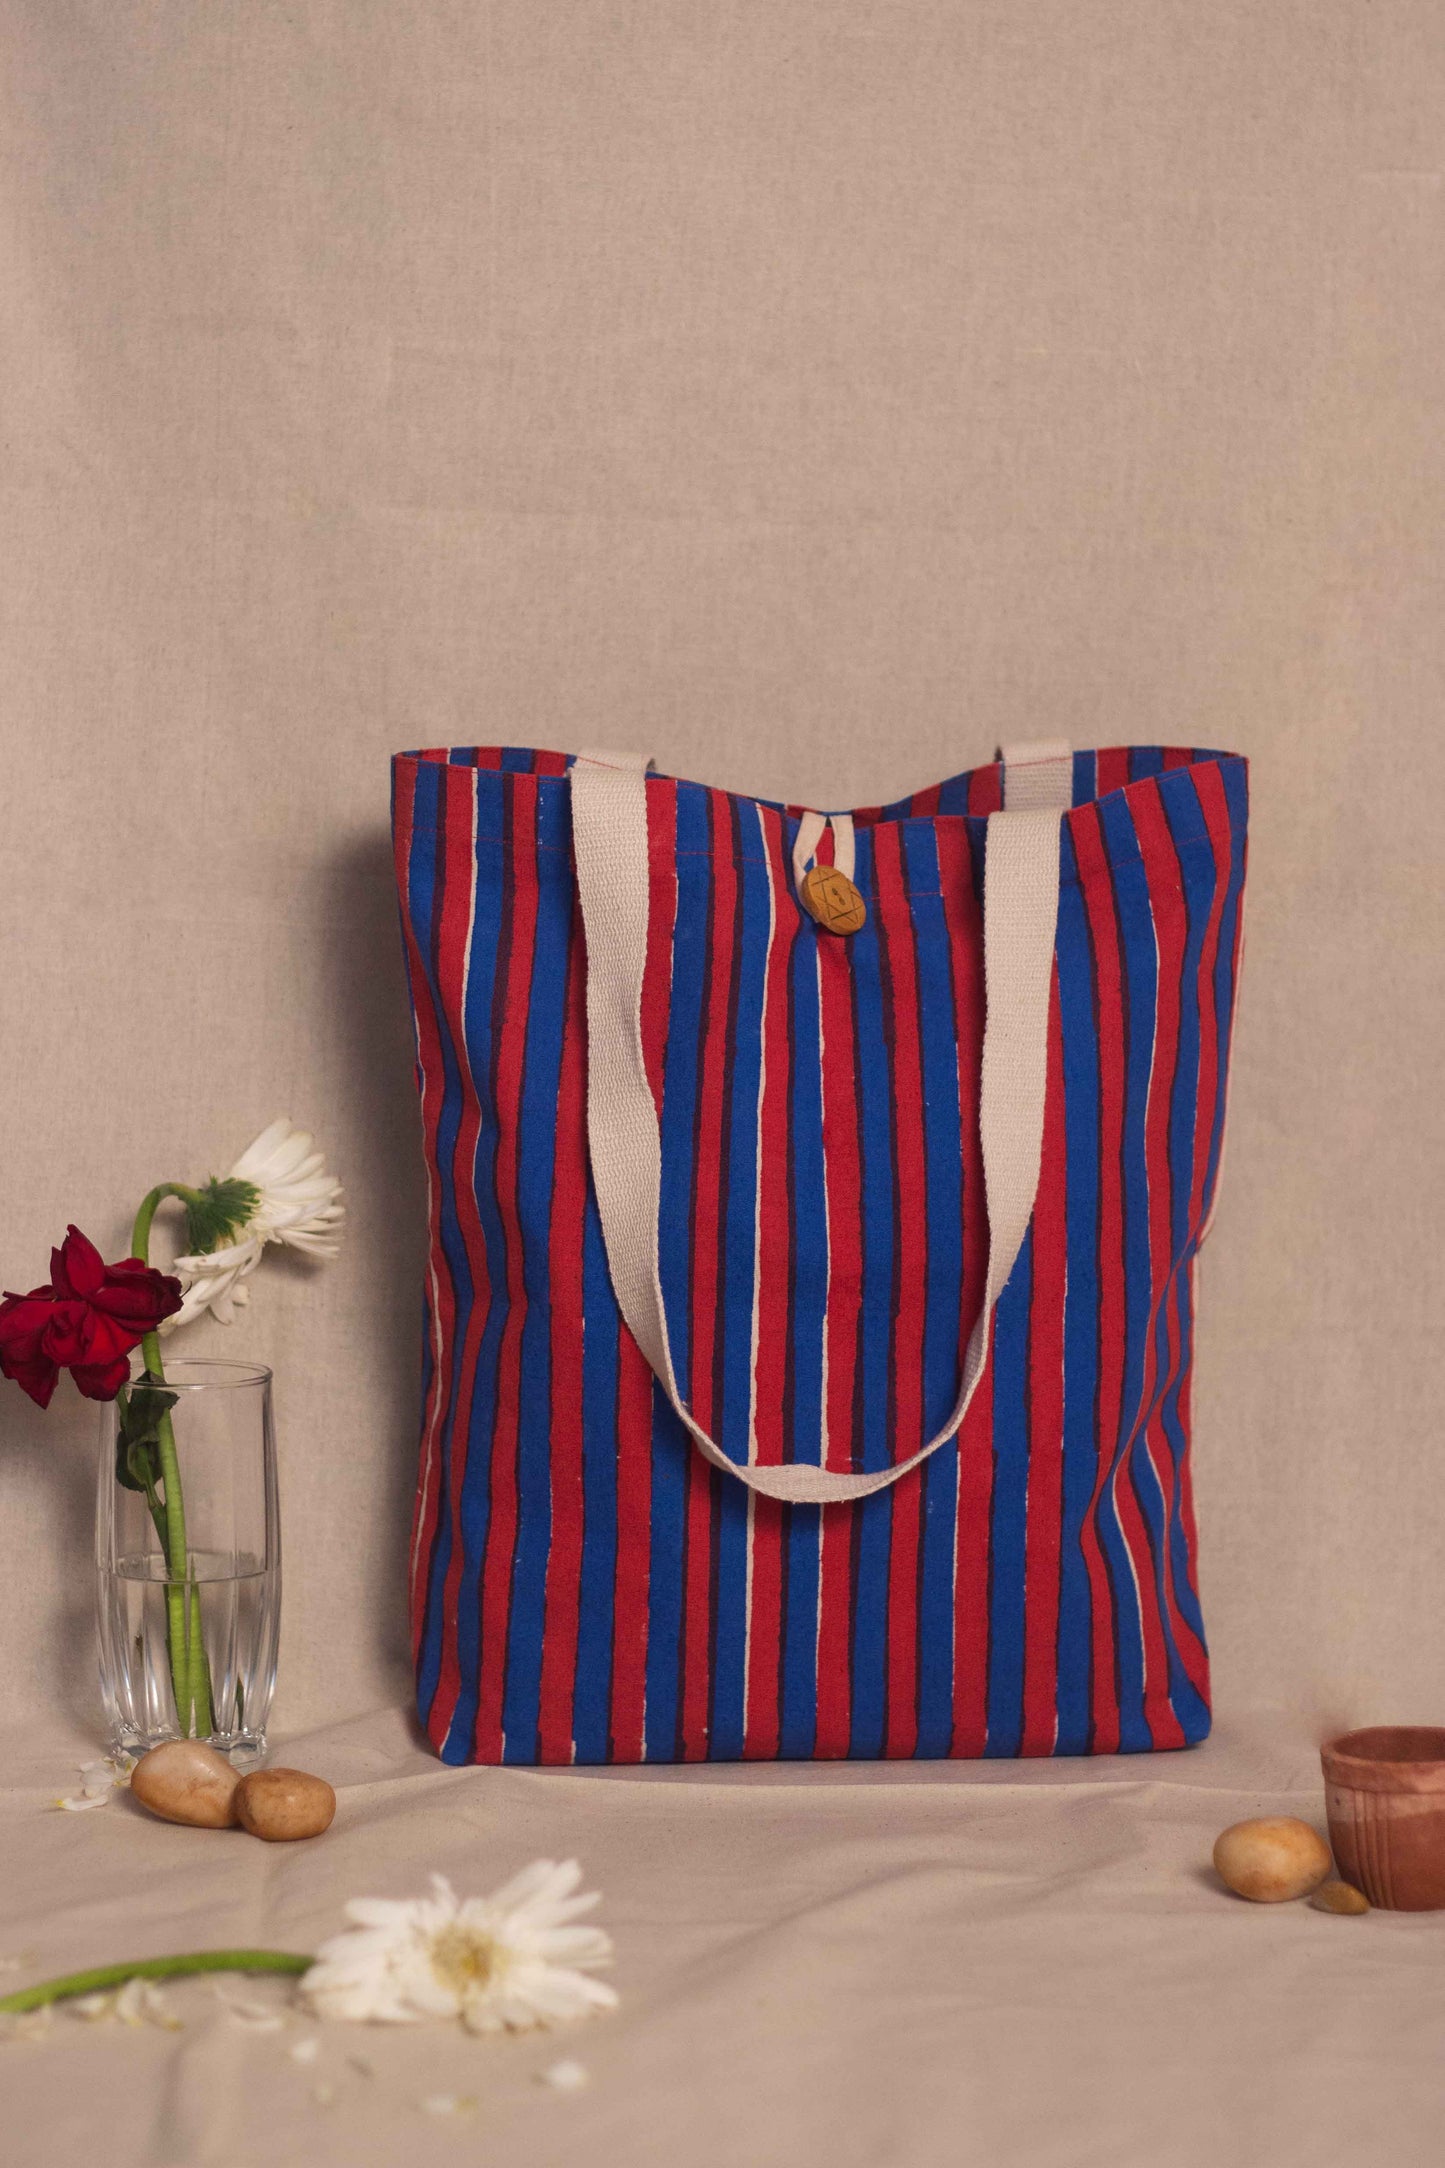 Cotton Shopping Tote Bag · Striped Red and Blue